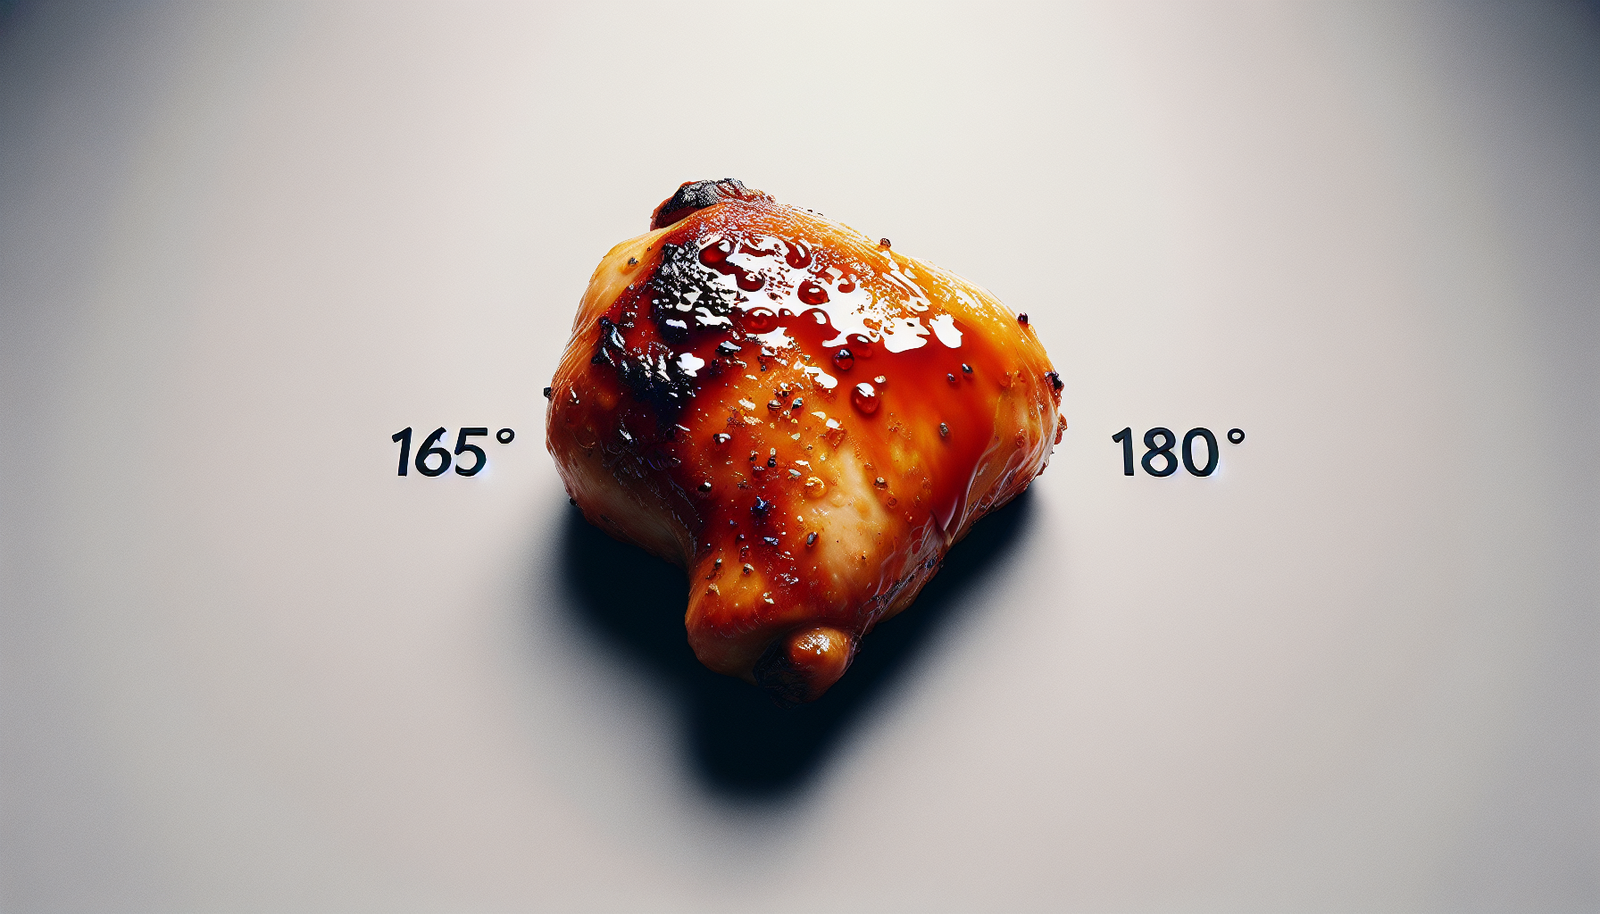 Is Chicken Done At 165 Or 180?